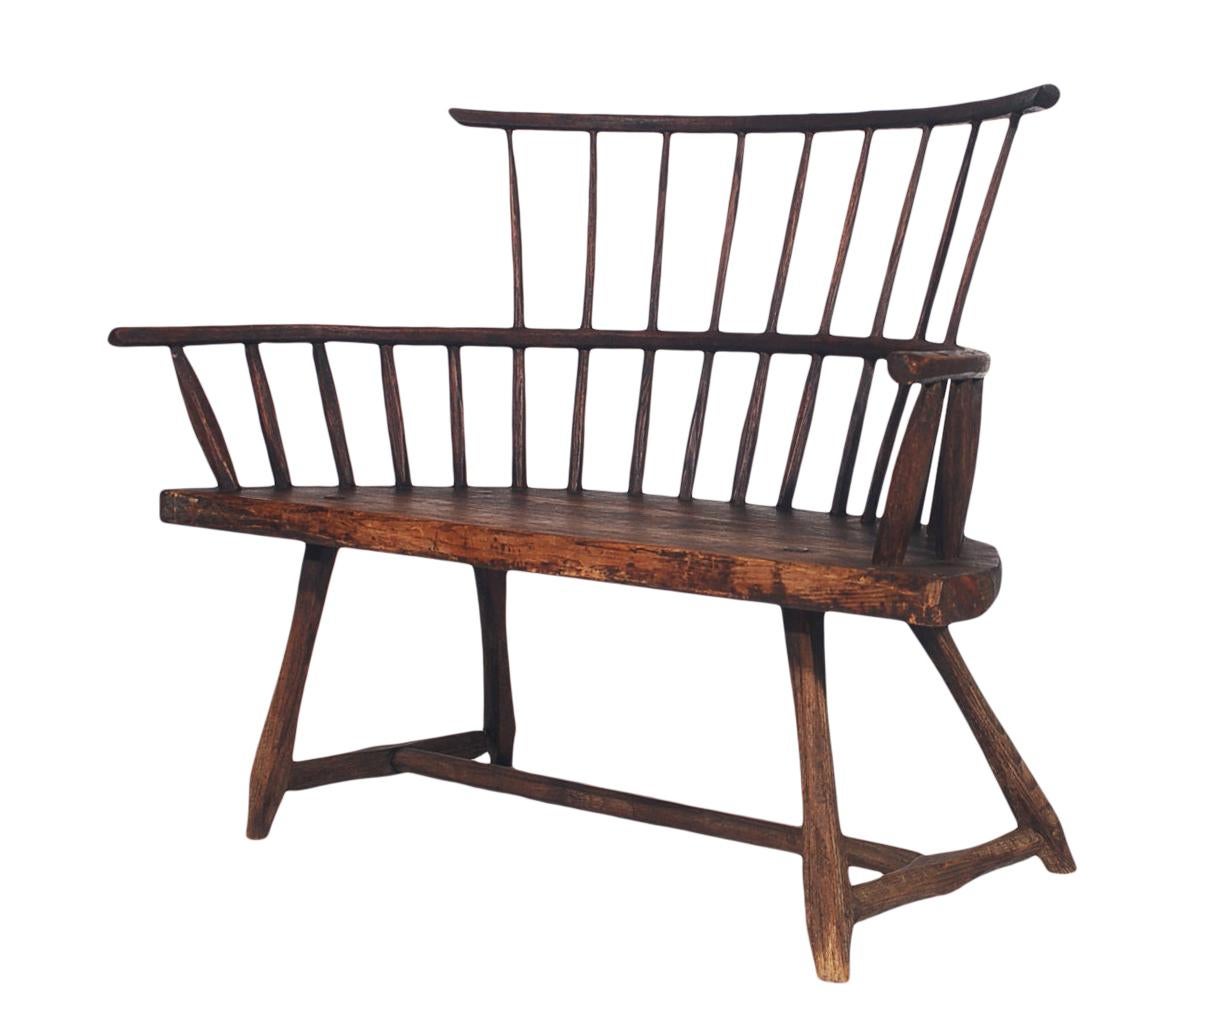 20th Century Antique Spindle Back Windsor Bench in Pine with a Modern Form